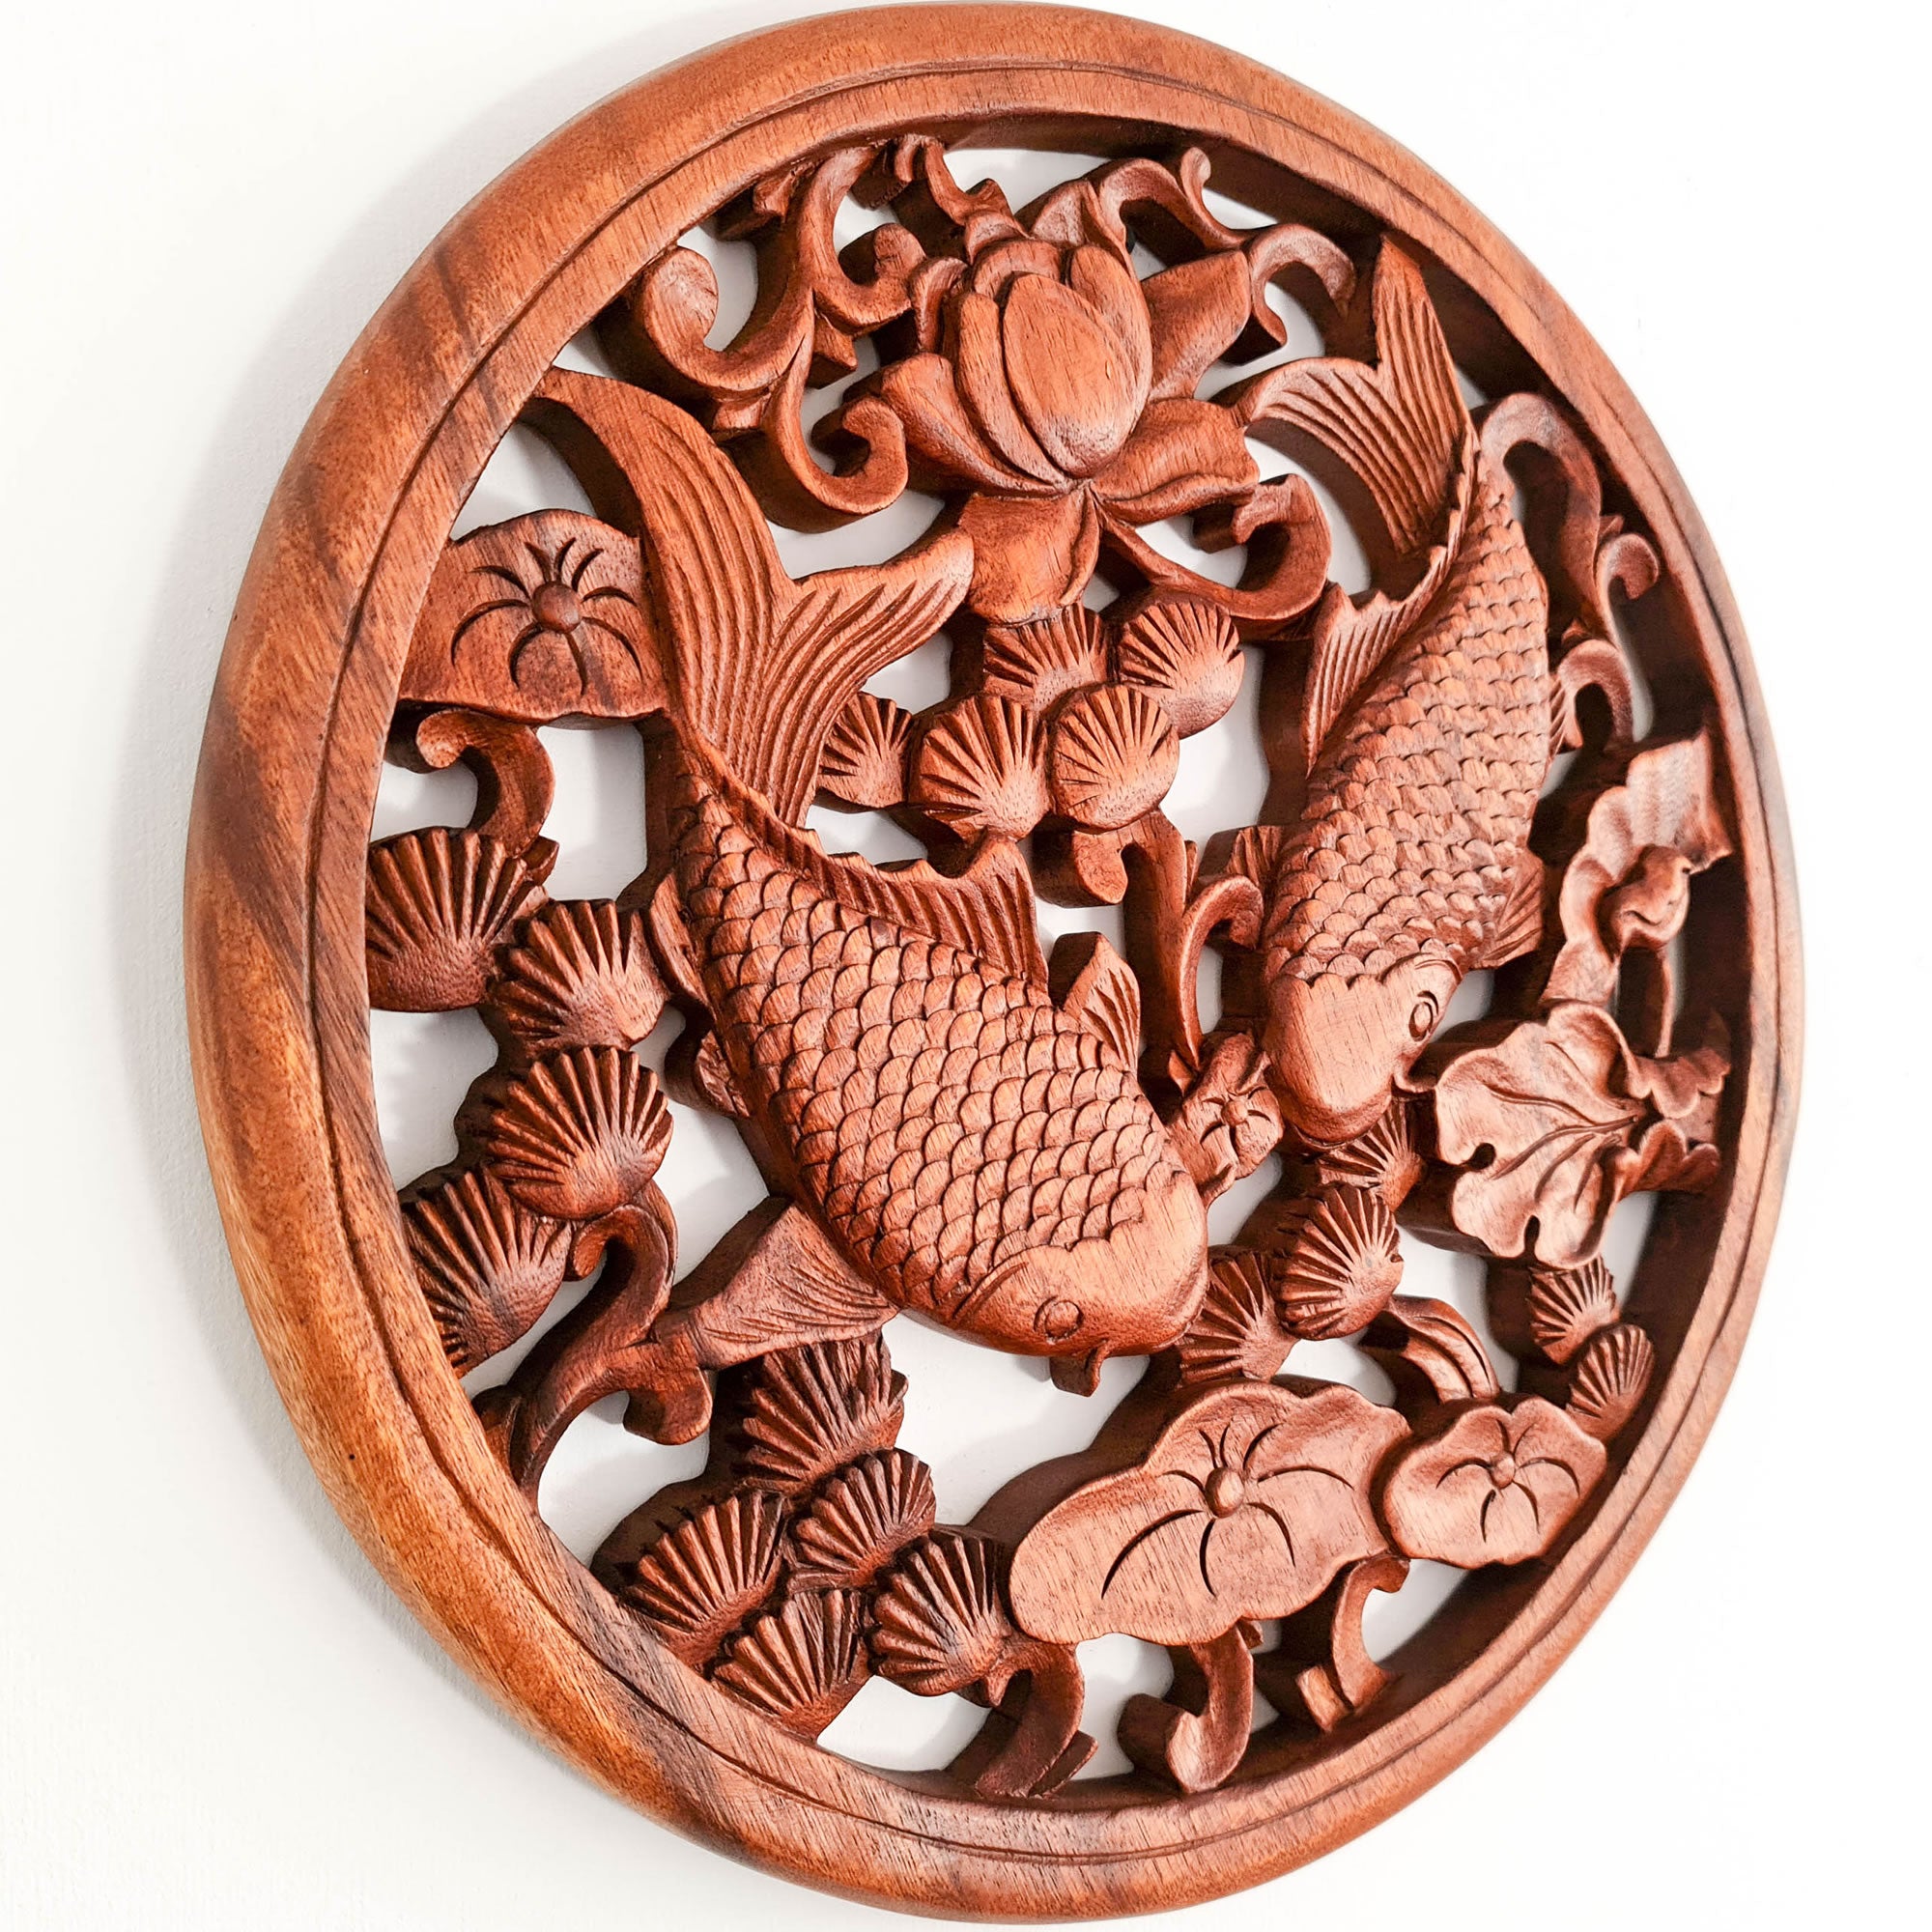 Hand Carved Wooden Wall Art Koi Fishes Decorative Hanging - A perfect Good luck GiftKoi Fishes Good Luck Feng Shui Hand Carved Wooden Wall Art Decoration Hanging - Perfect Unique Gift